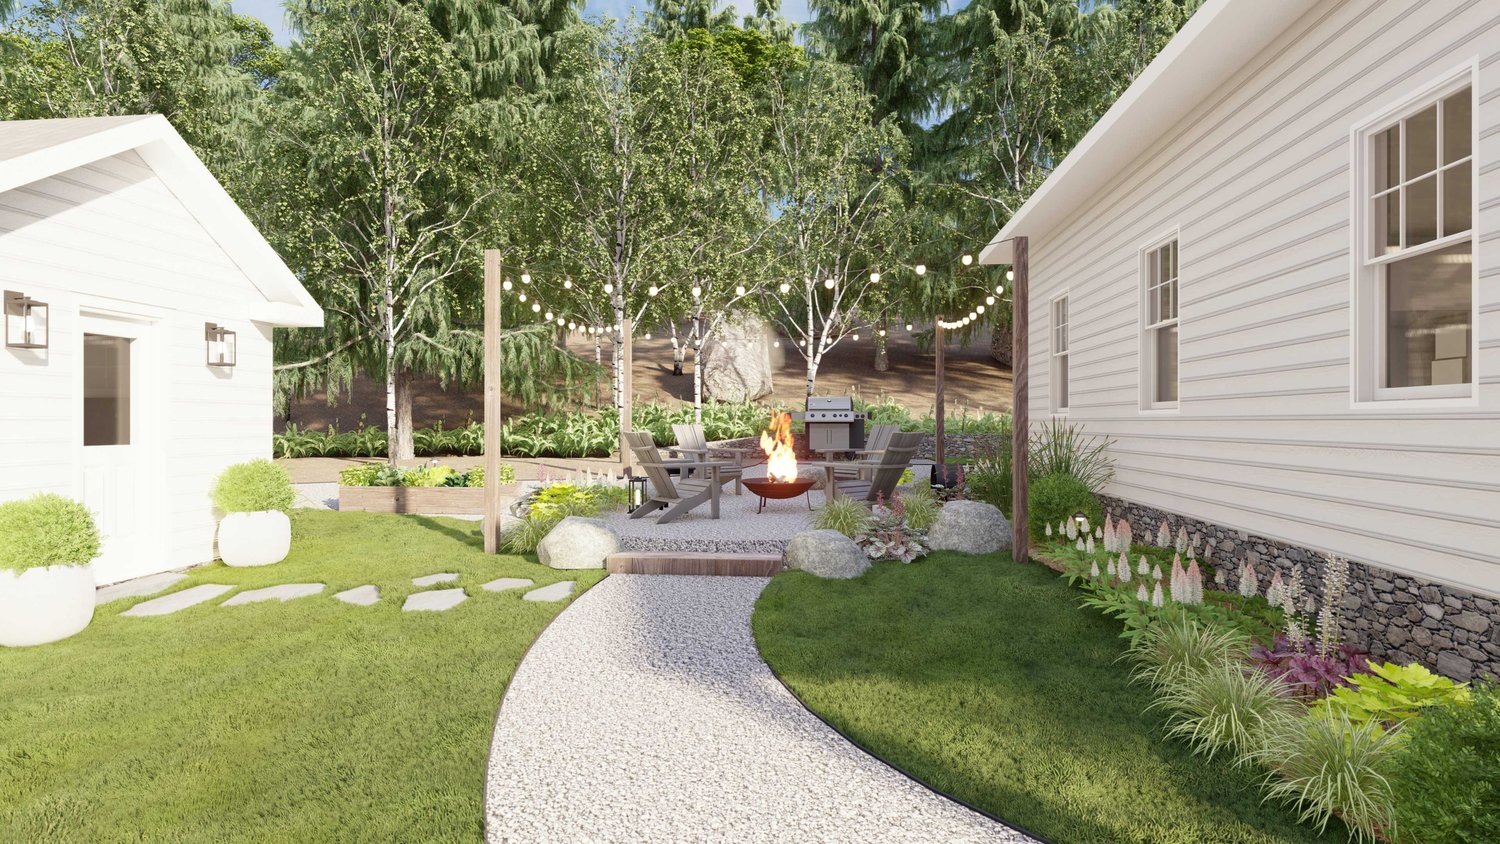 Long Island side yard with concrete patio fire pit seating area, outdoor kitchen, concrete walkway, flowers and paver stepping stones